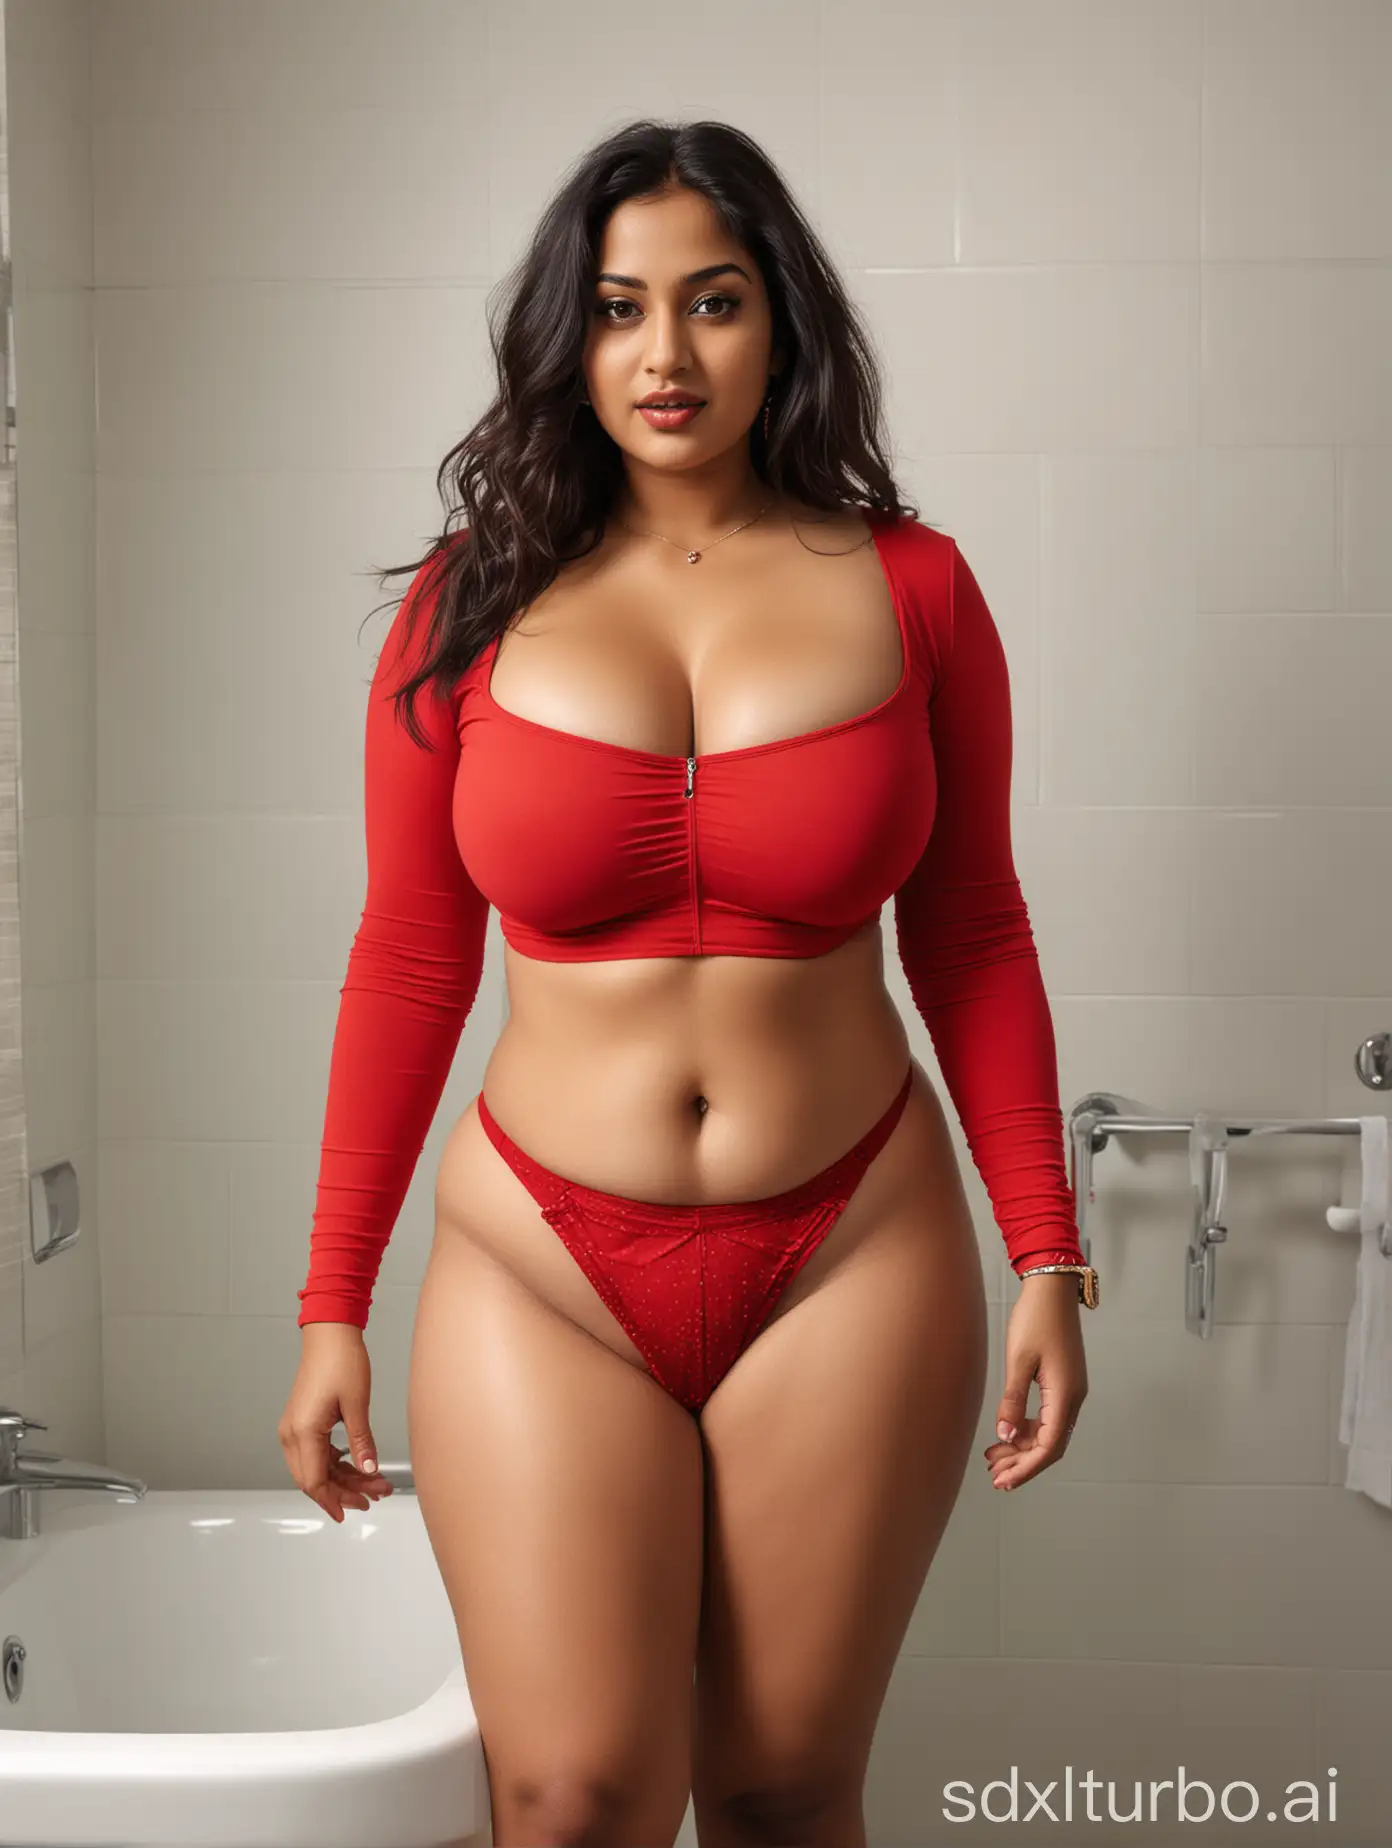 CURVY indian woman with huge breasts, with Plump female body, with tightest long sleeve red square neck crop top with deep cleavage and red thong, she has busty body, is standing at the washroom.